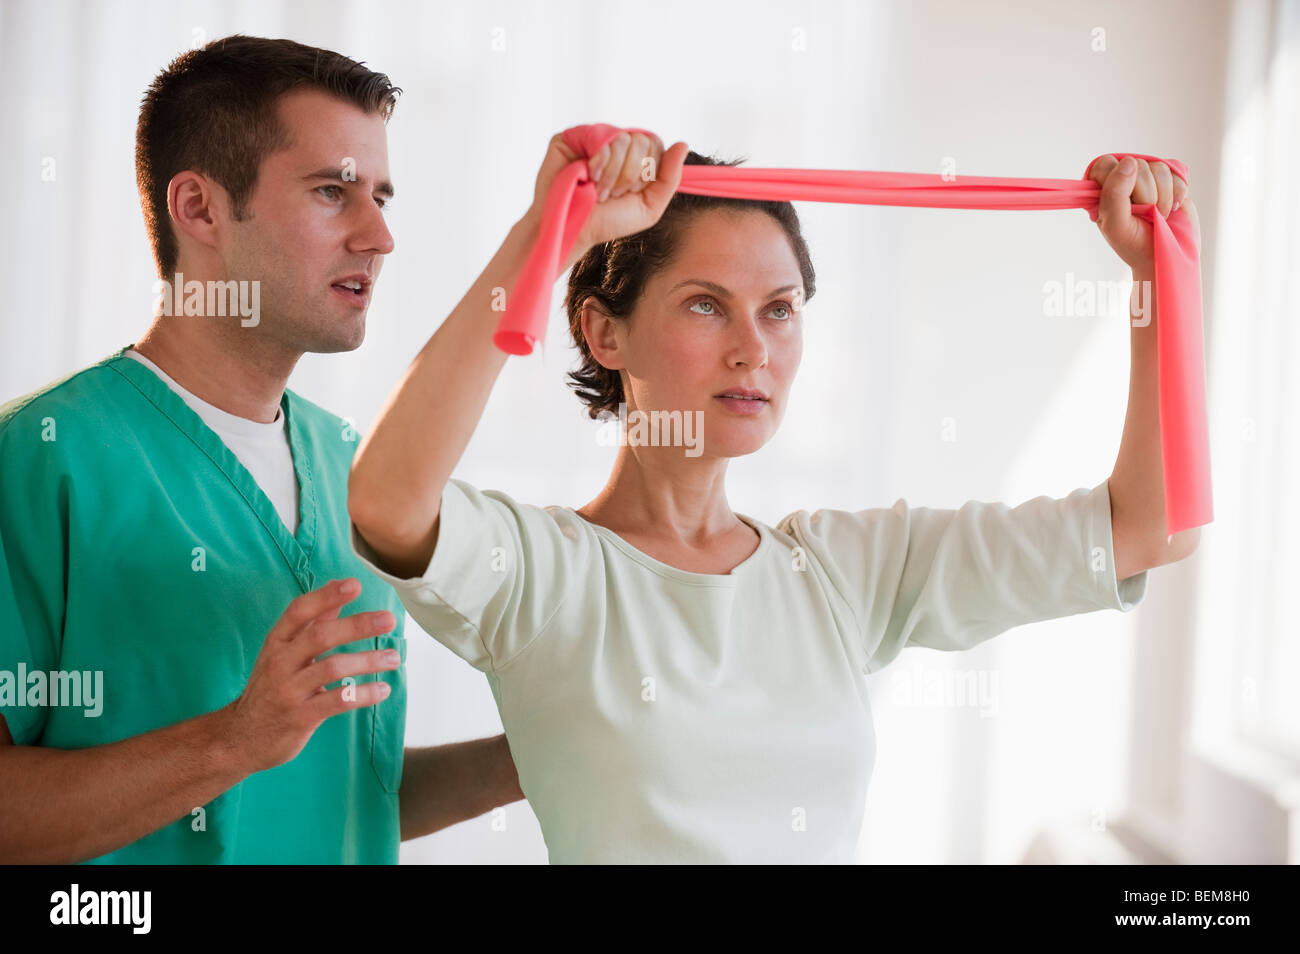 Therapist and patient Stock Photo